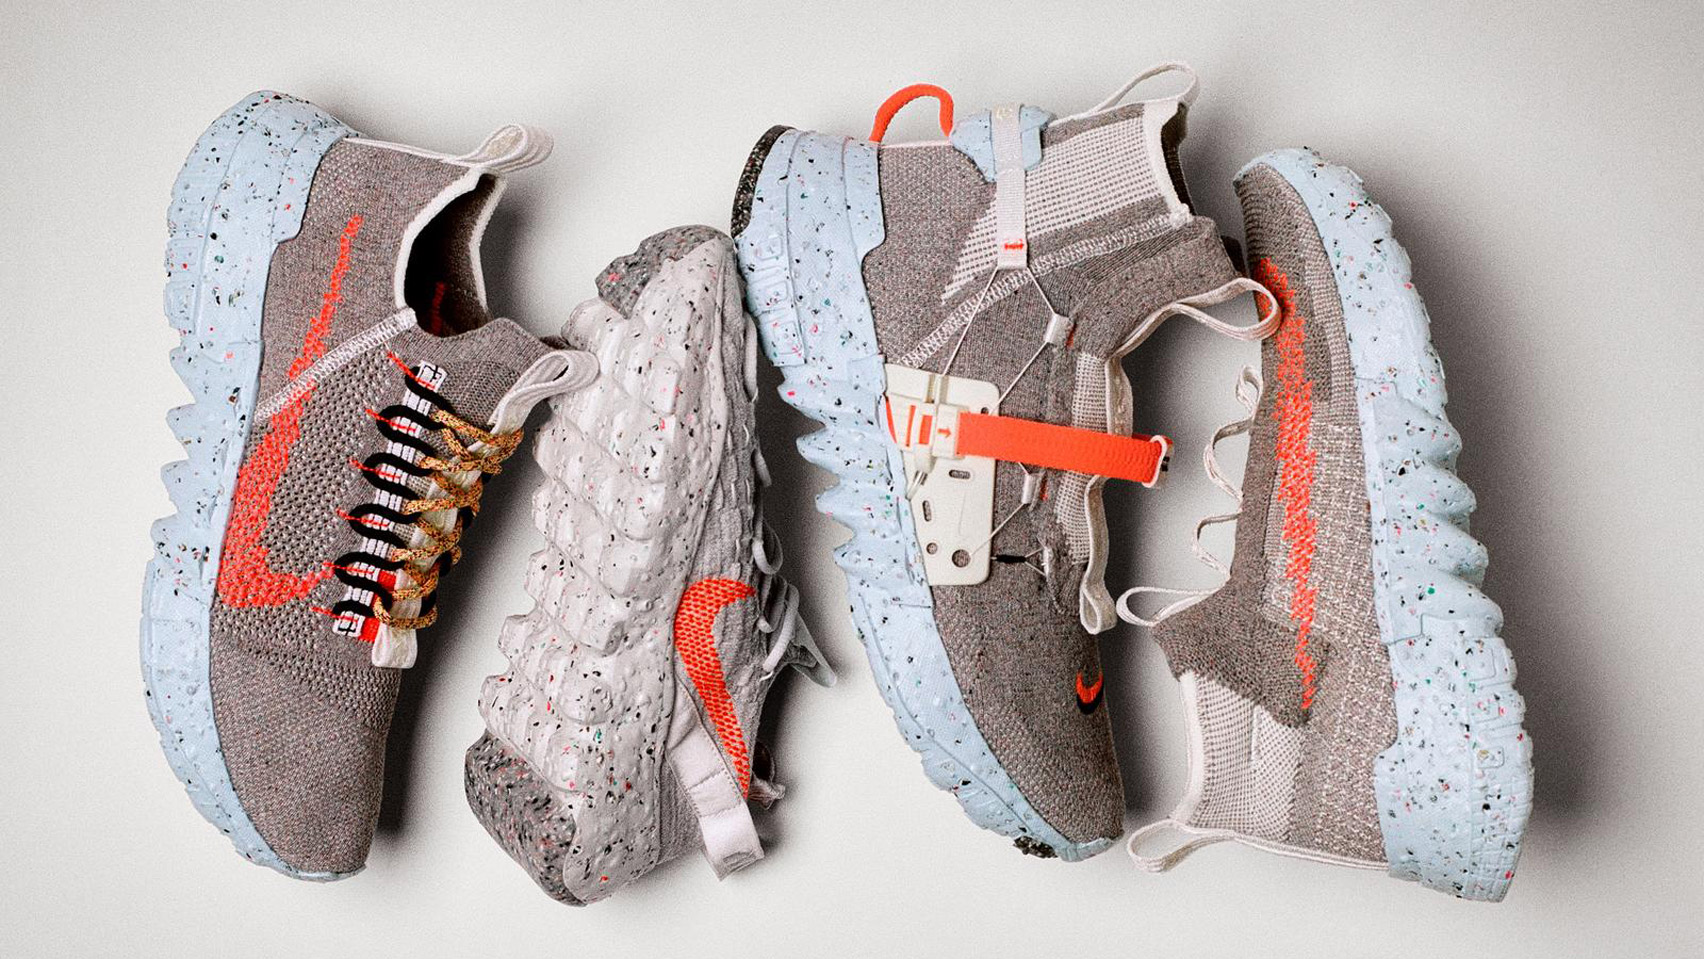 Nike Space Hippie footwear made from recycled factory